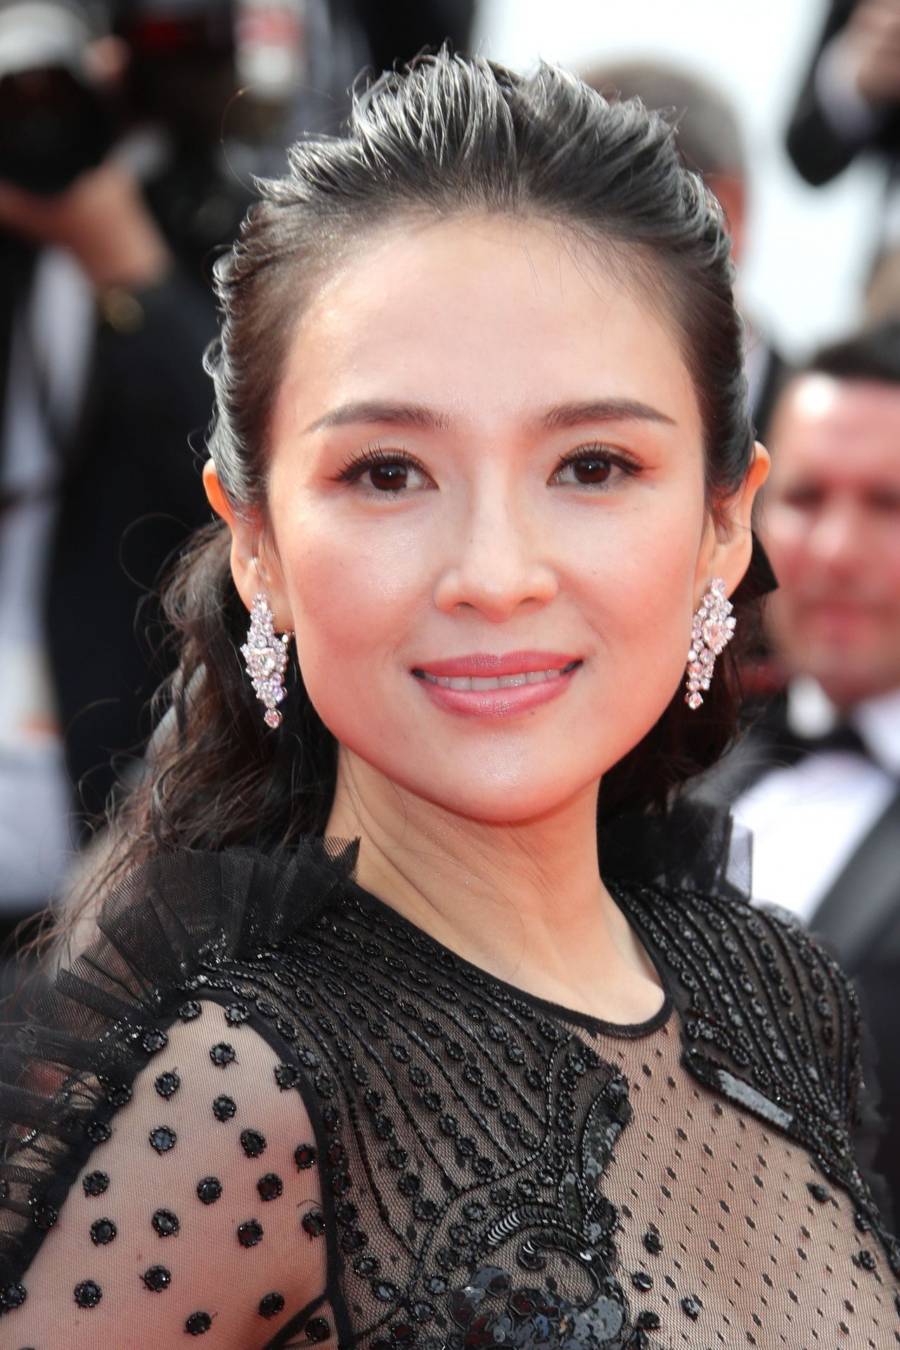 Chinese Actress Zhang Ziyi At Cannes Film Festival | CineHub